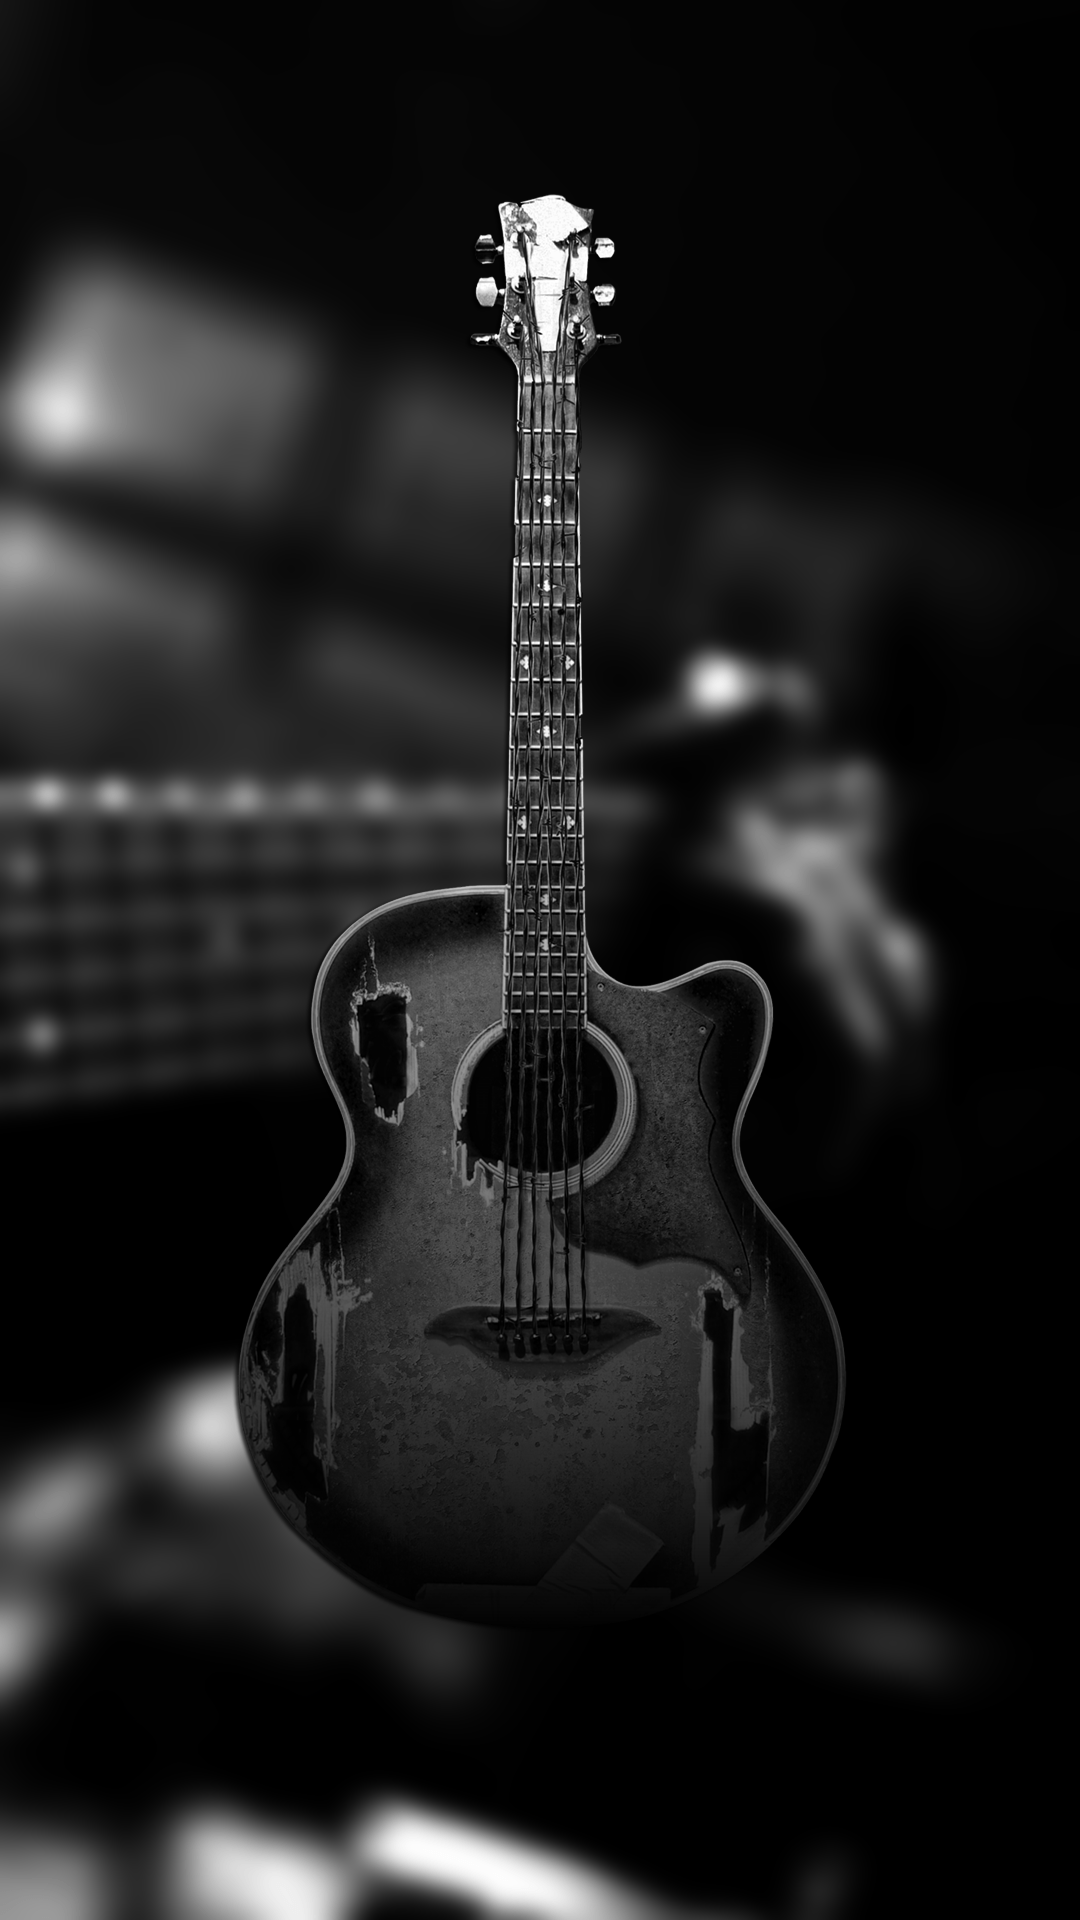 Guitar Android Phone Wallpapers - Wallpaper Cave - 1080 x 1920 png 474kB